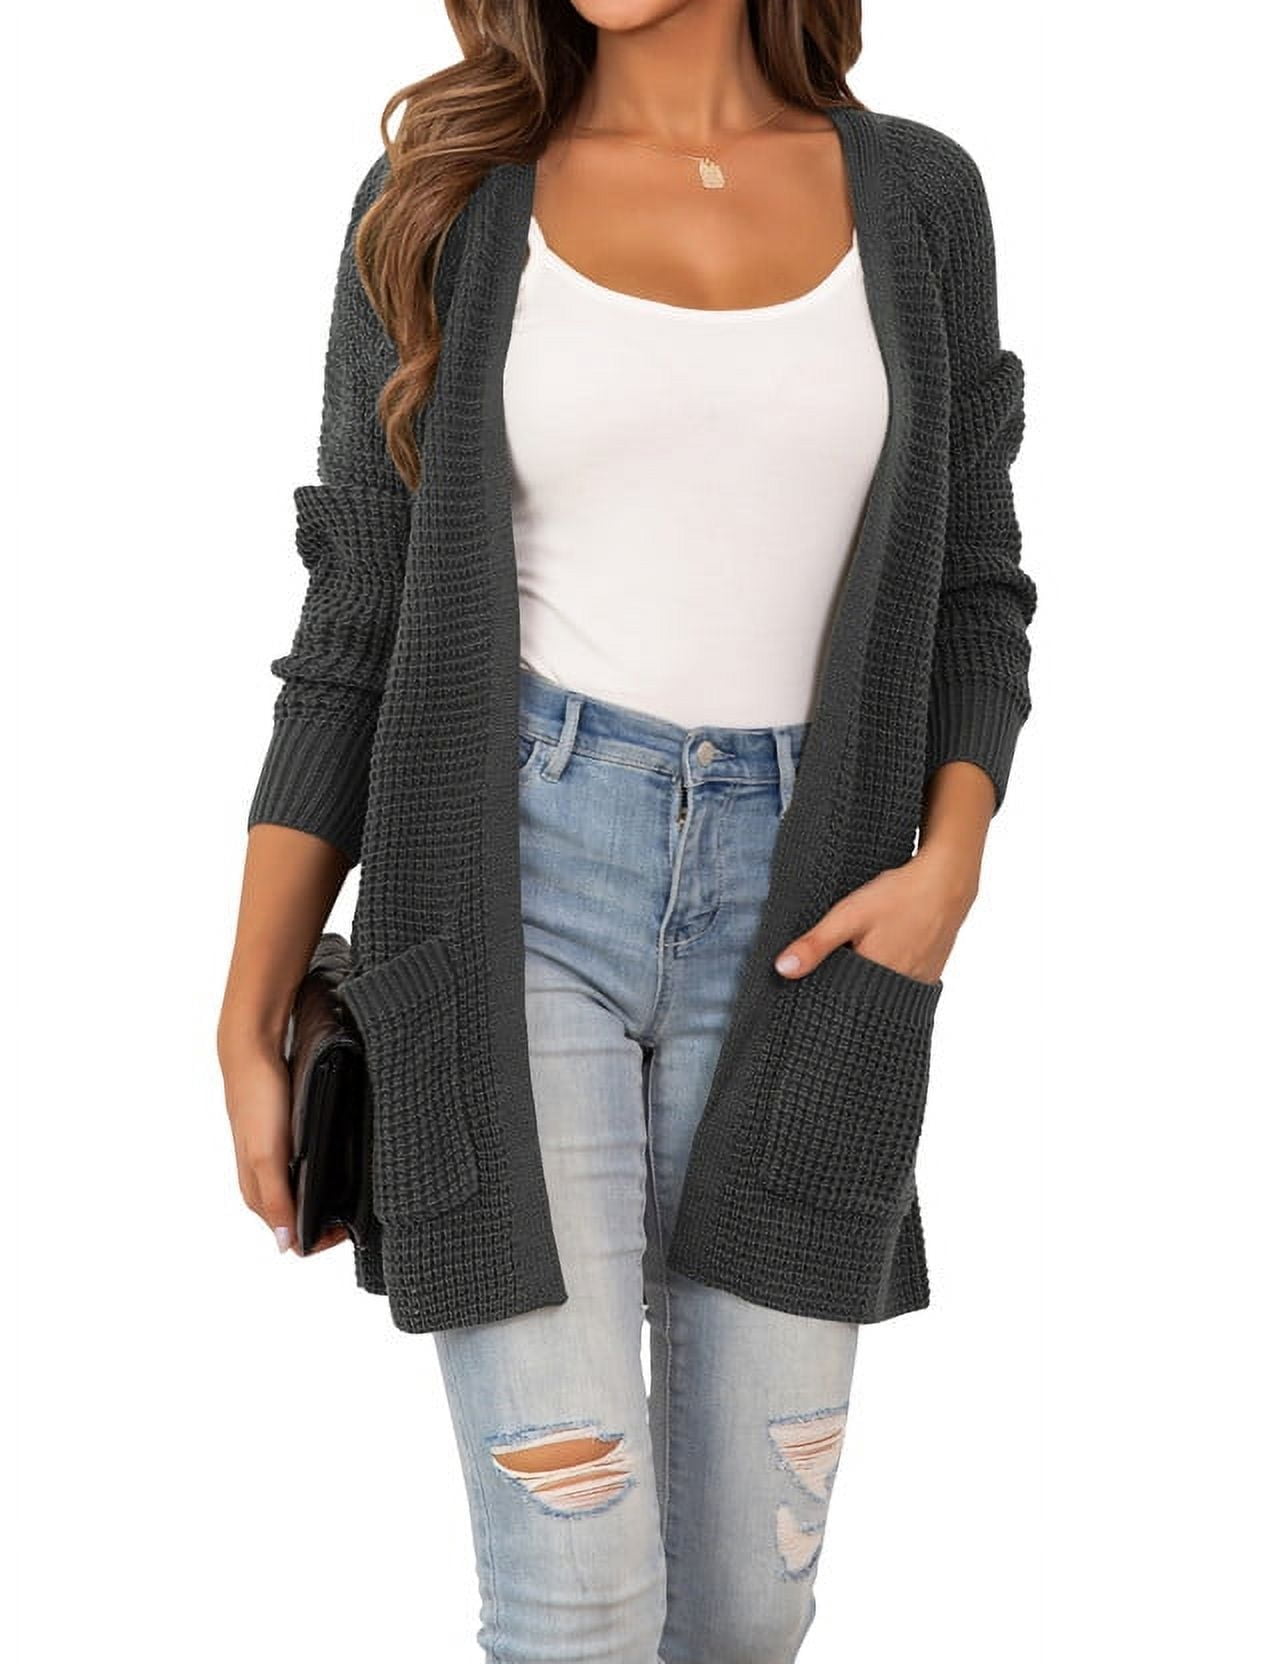 CPOKRTWSO Womens Cardigan Sweaters Front Open with Pockets Chunky Cable ...